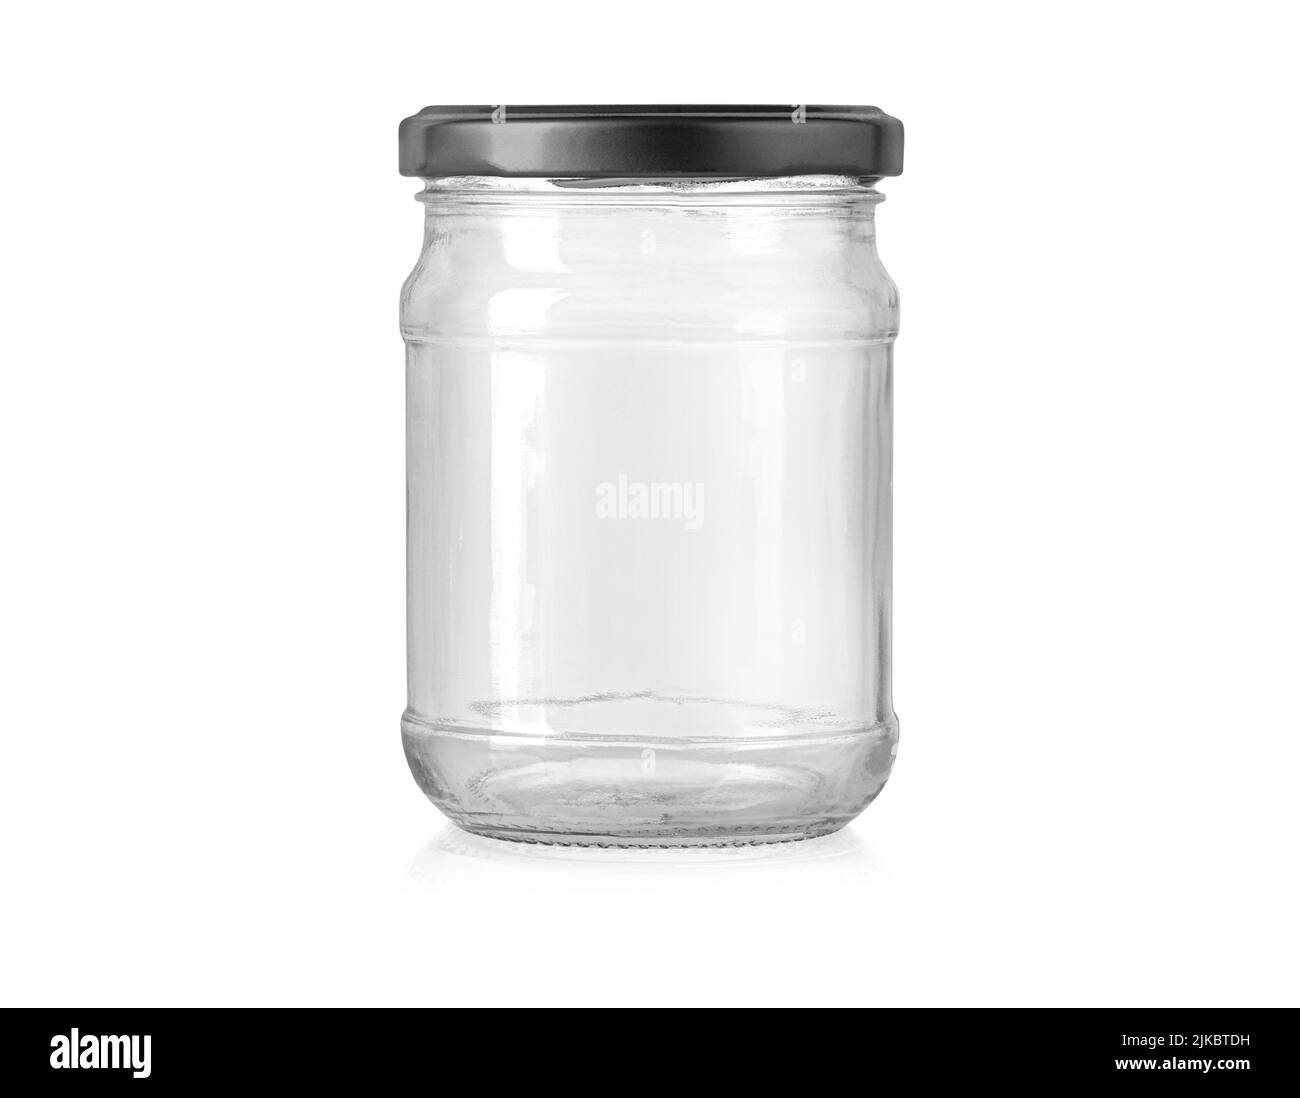 empty glass jar with a screw thread isolated on a white background with clipping path Stock Photo